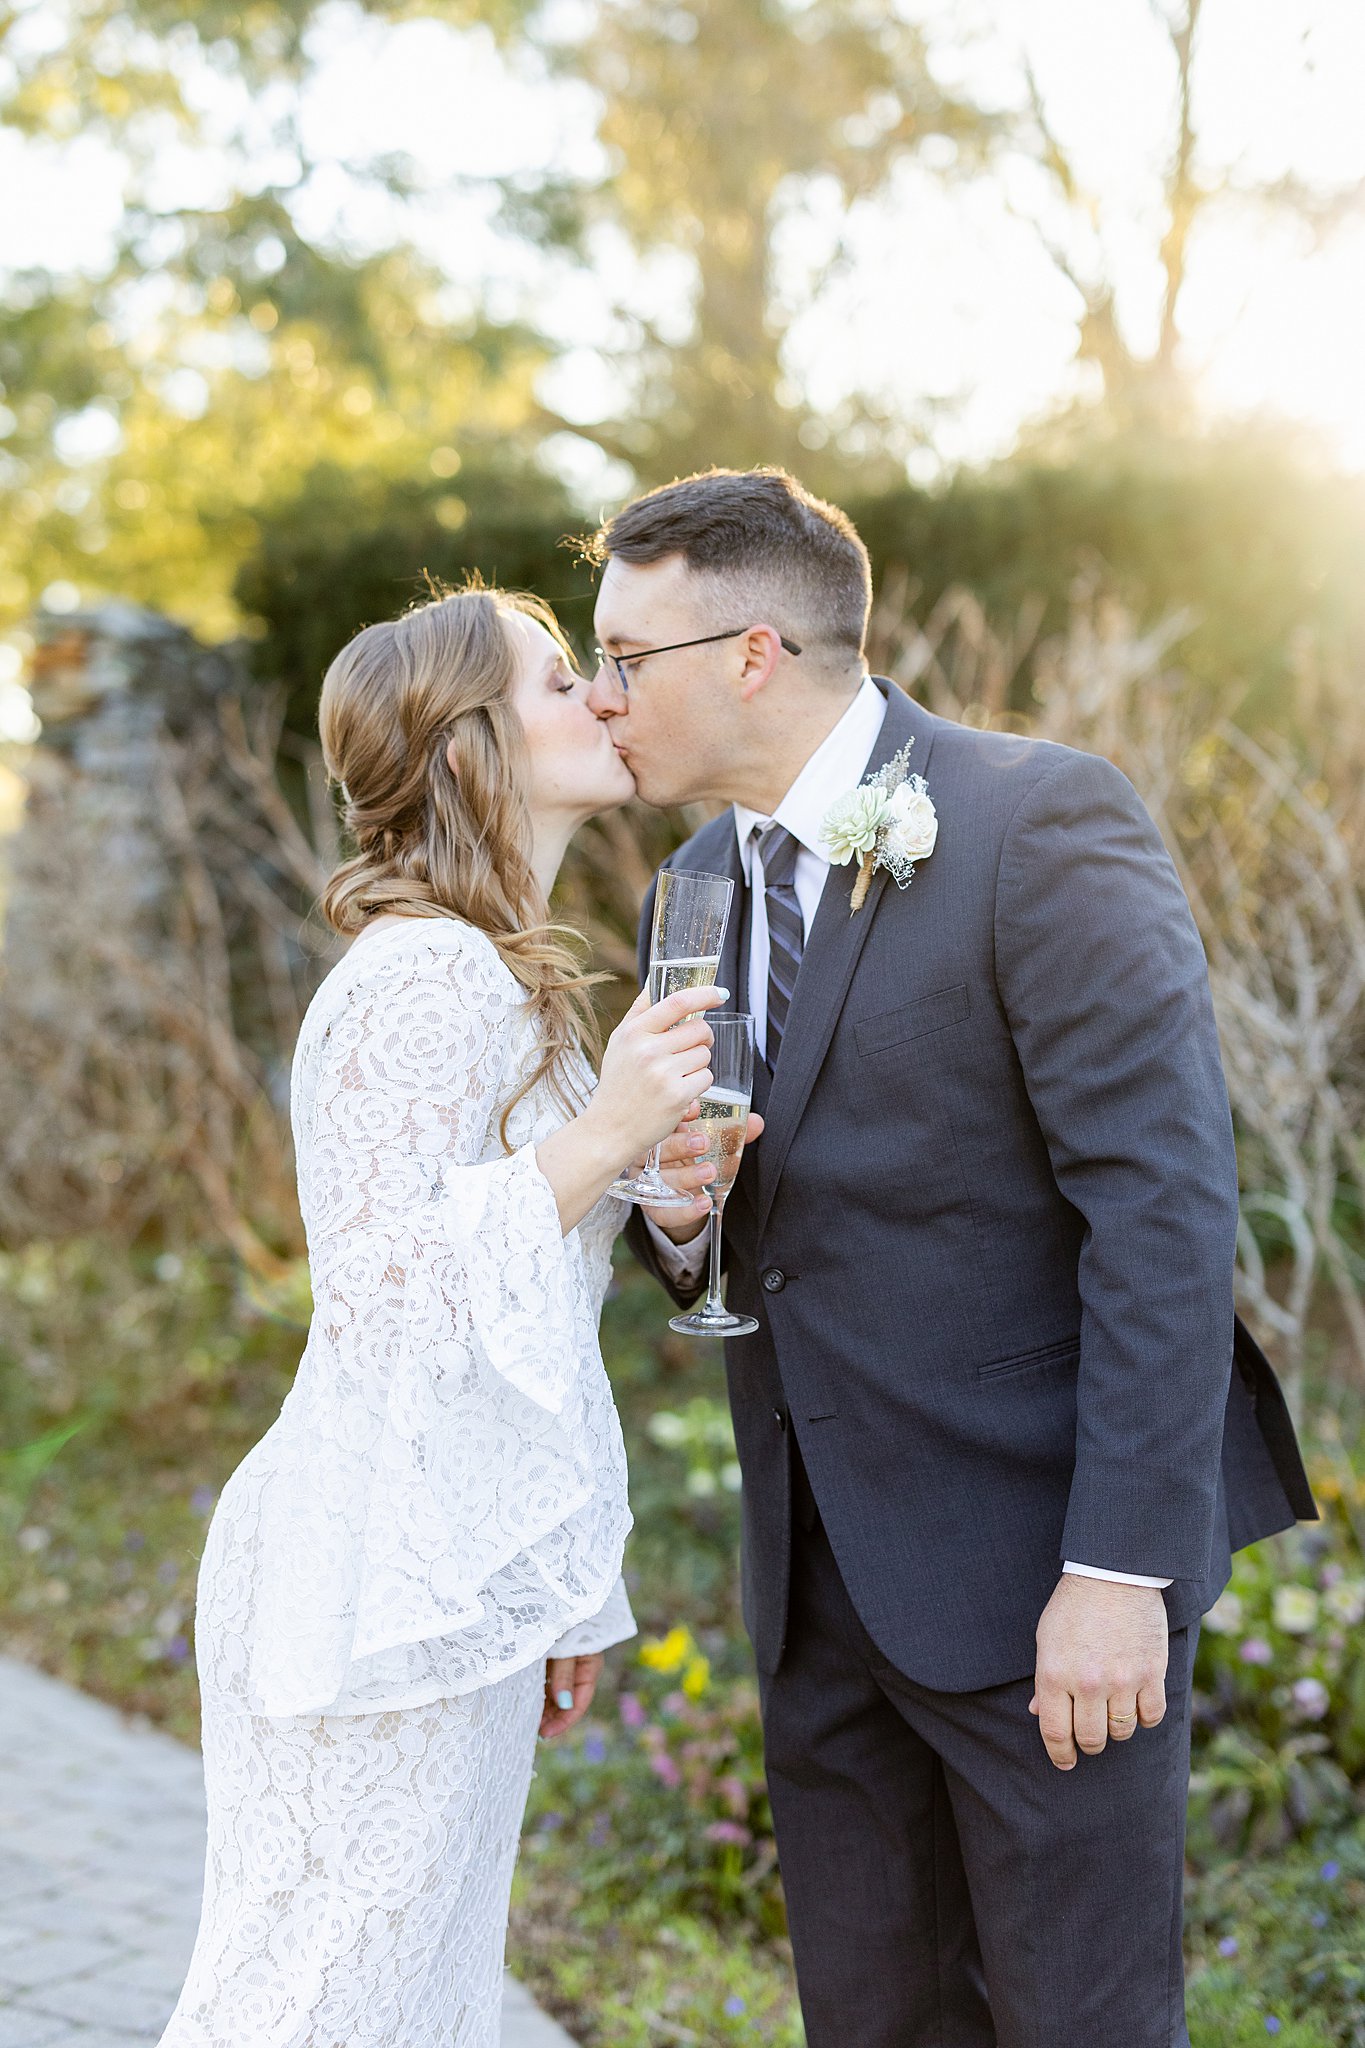 Newlyweds kiss with champagne in a stone walled garden